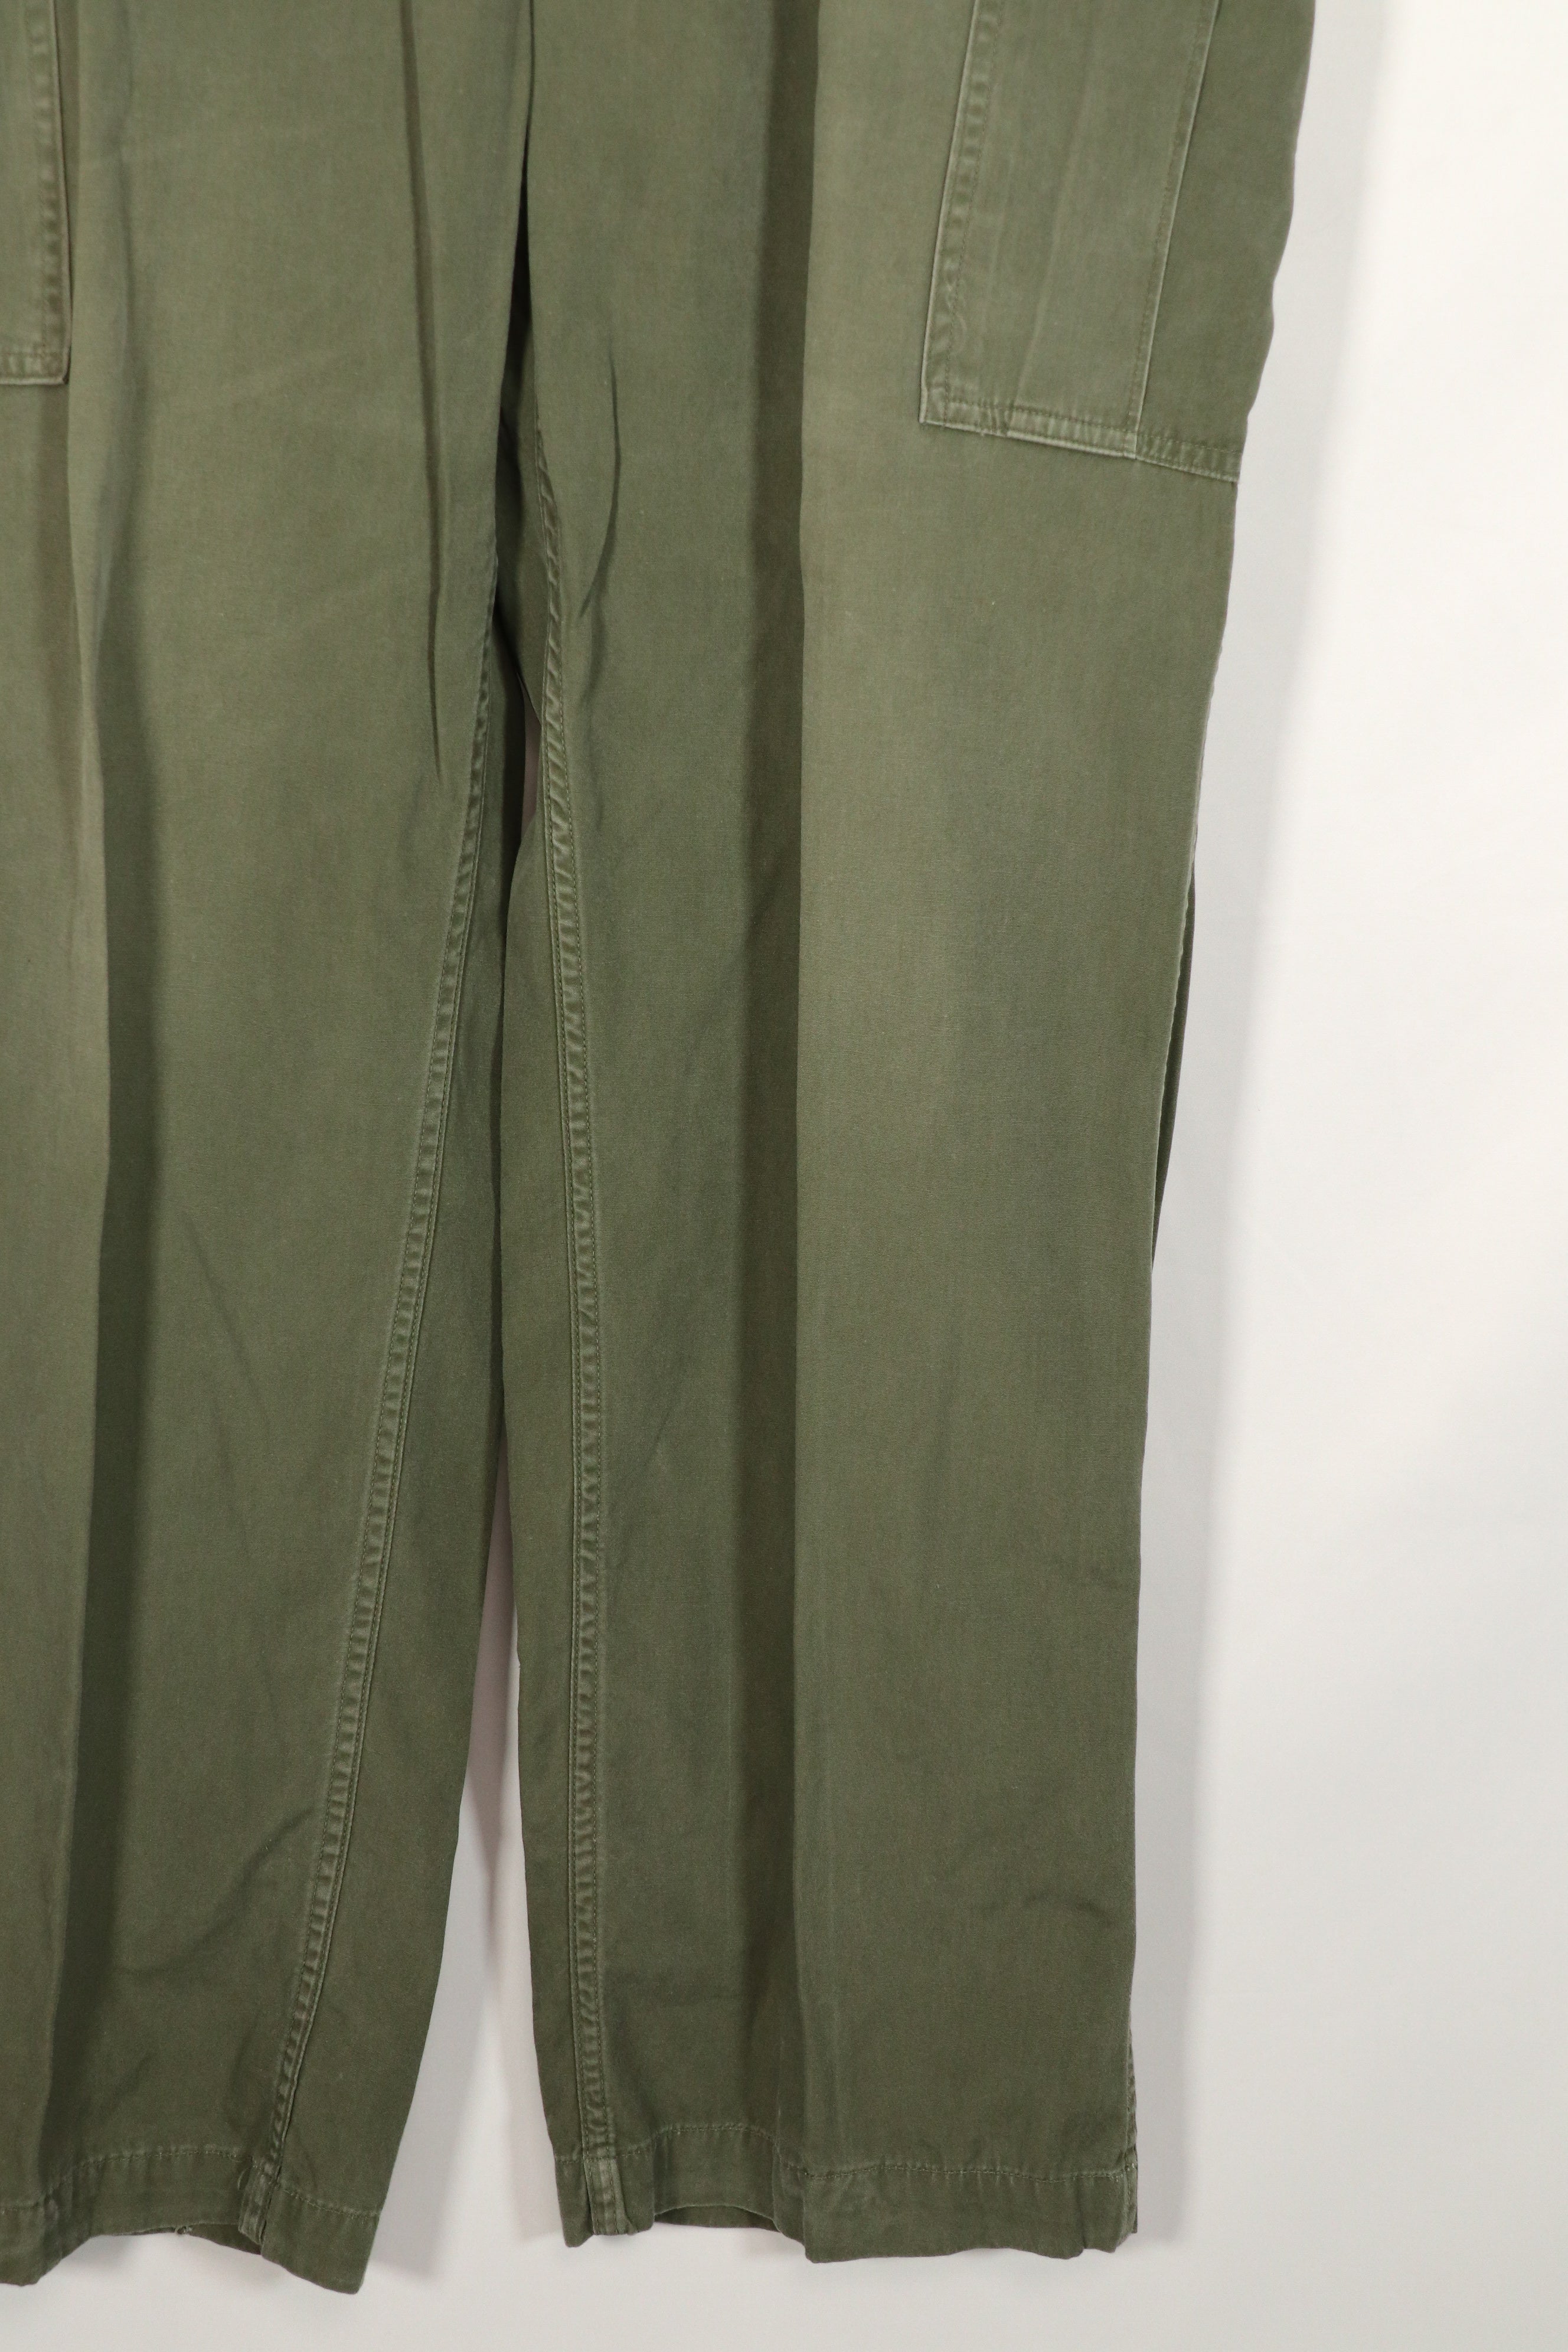 Real 1964 1ST MODEL Jungle Fatigue M-R Pants Used A